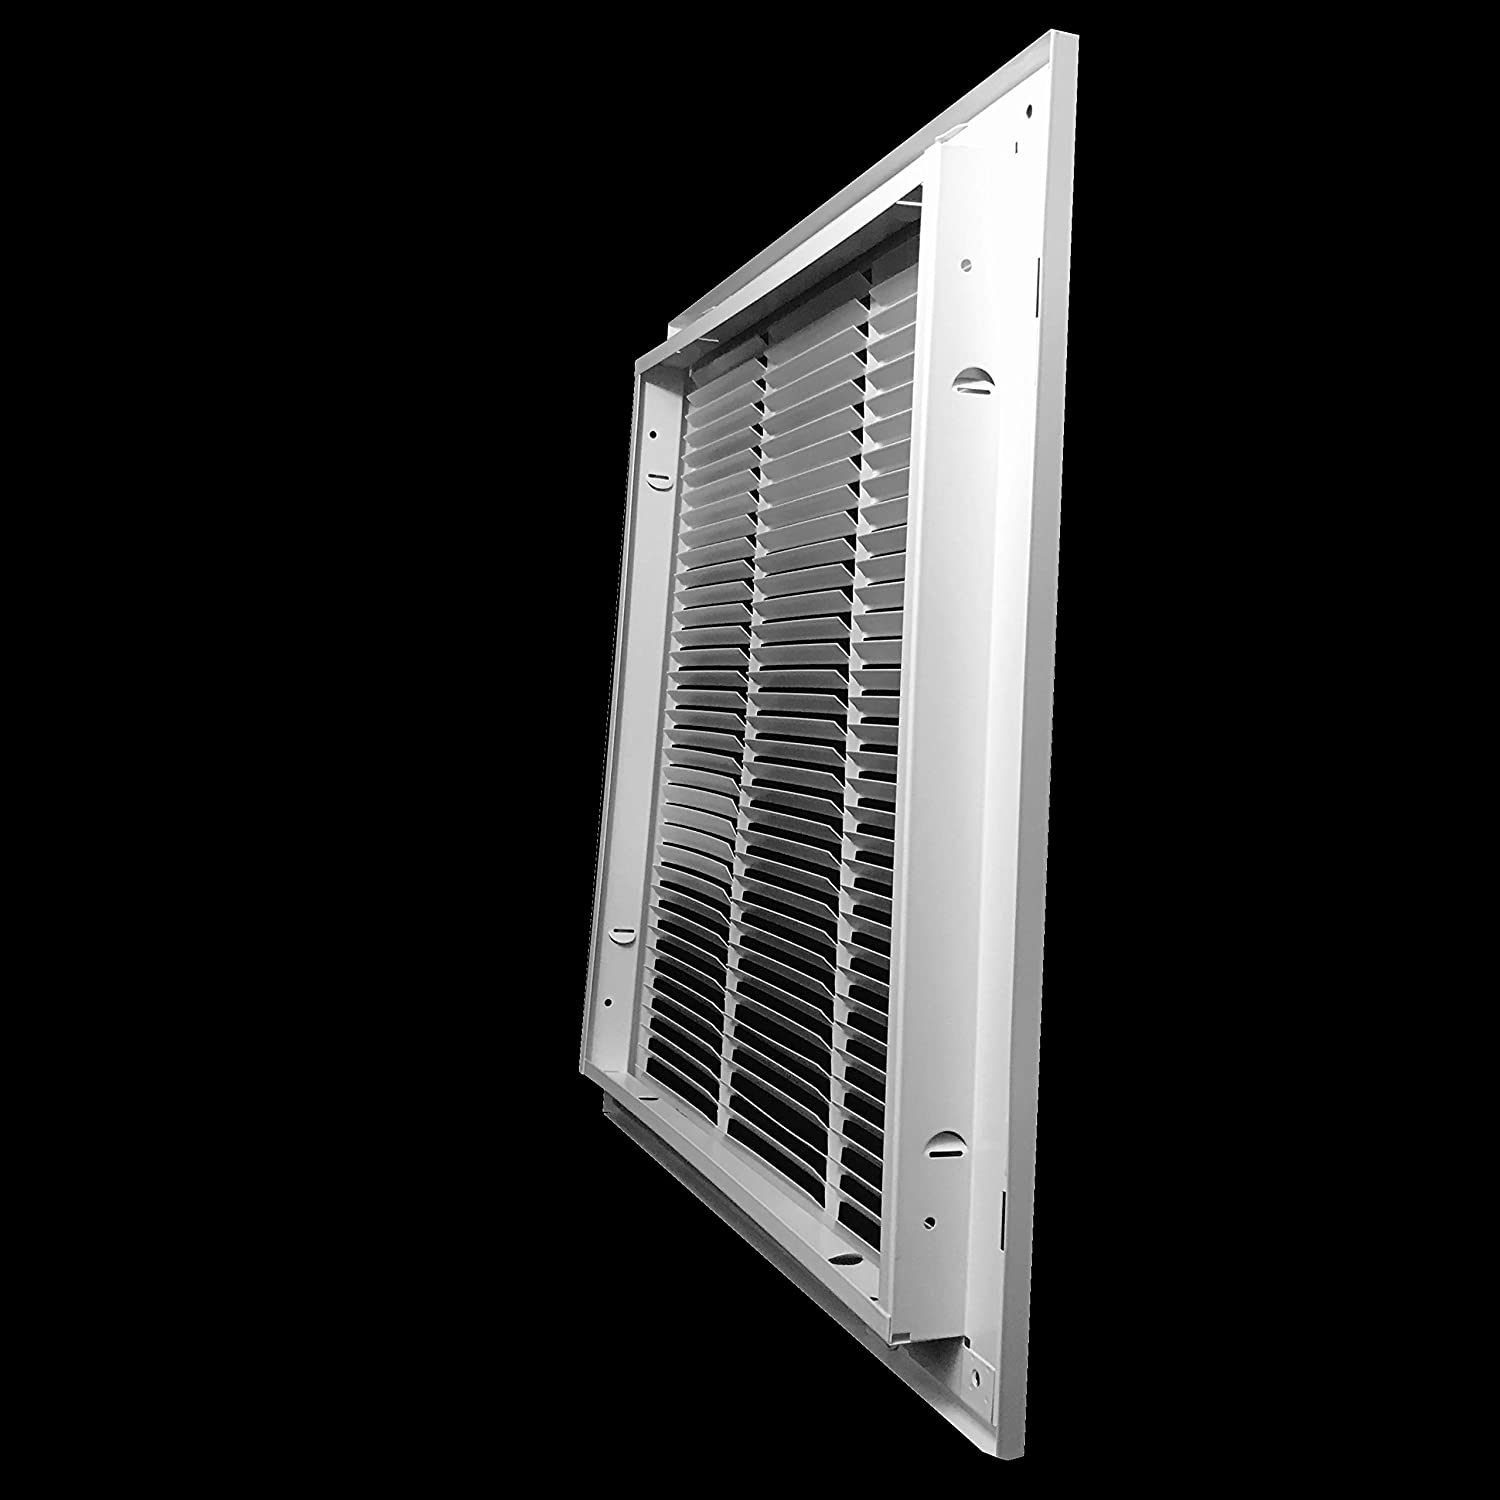 24" X 14" Duct Opening | Steel Return Air Filter Grille for Sidewall and Ceiling